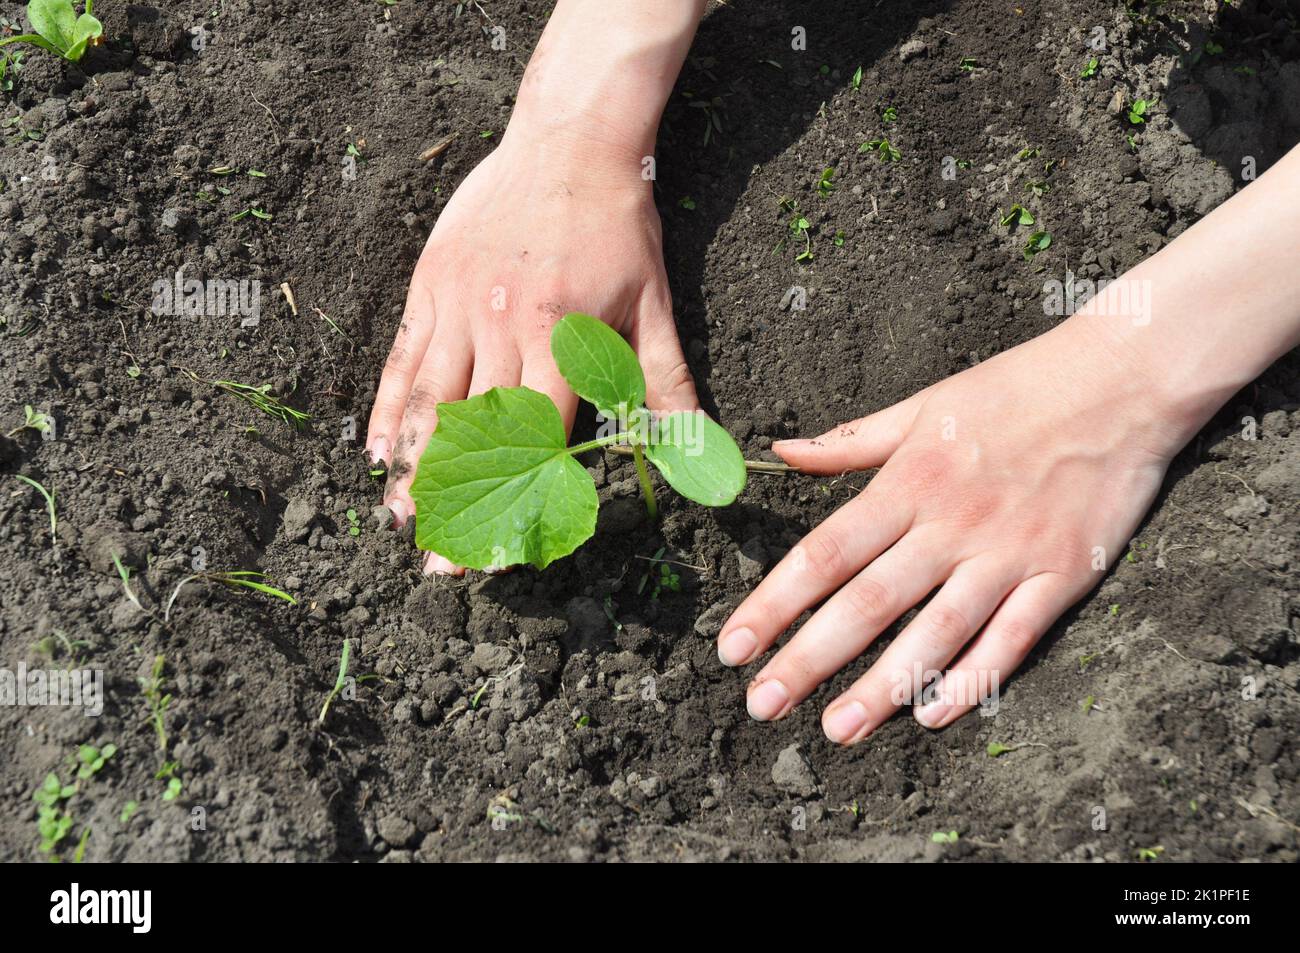 Cucumbers: Planting, Growing and Harvesting Cucumber Plants. Stock Photo